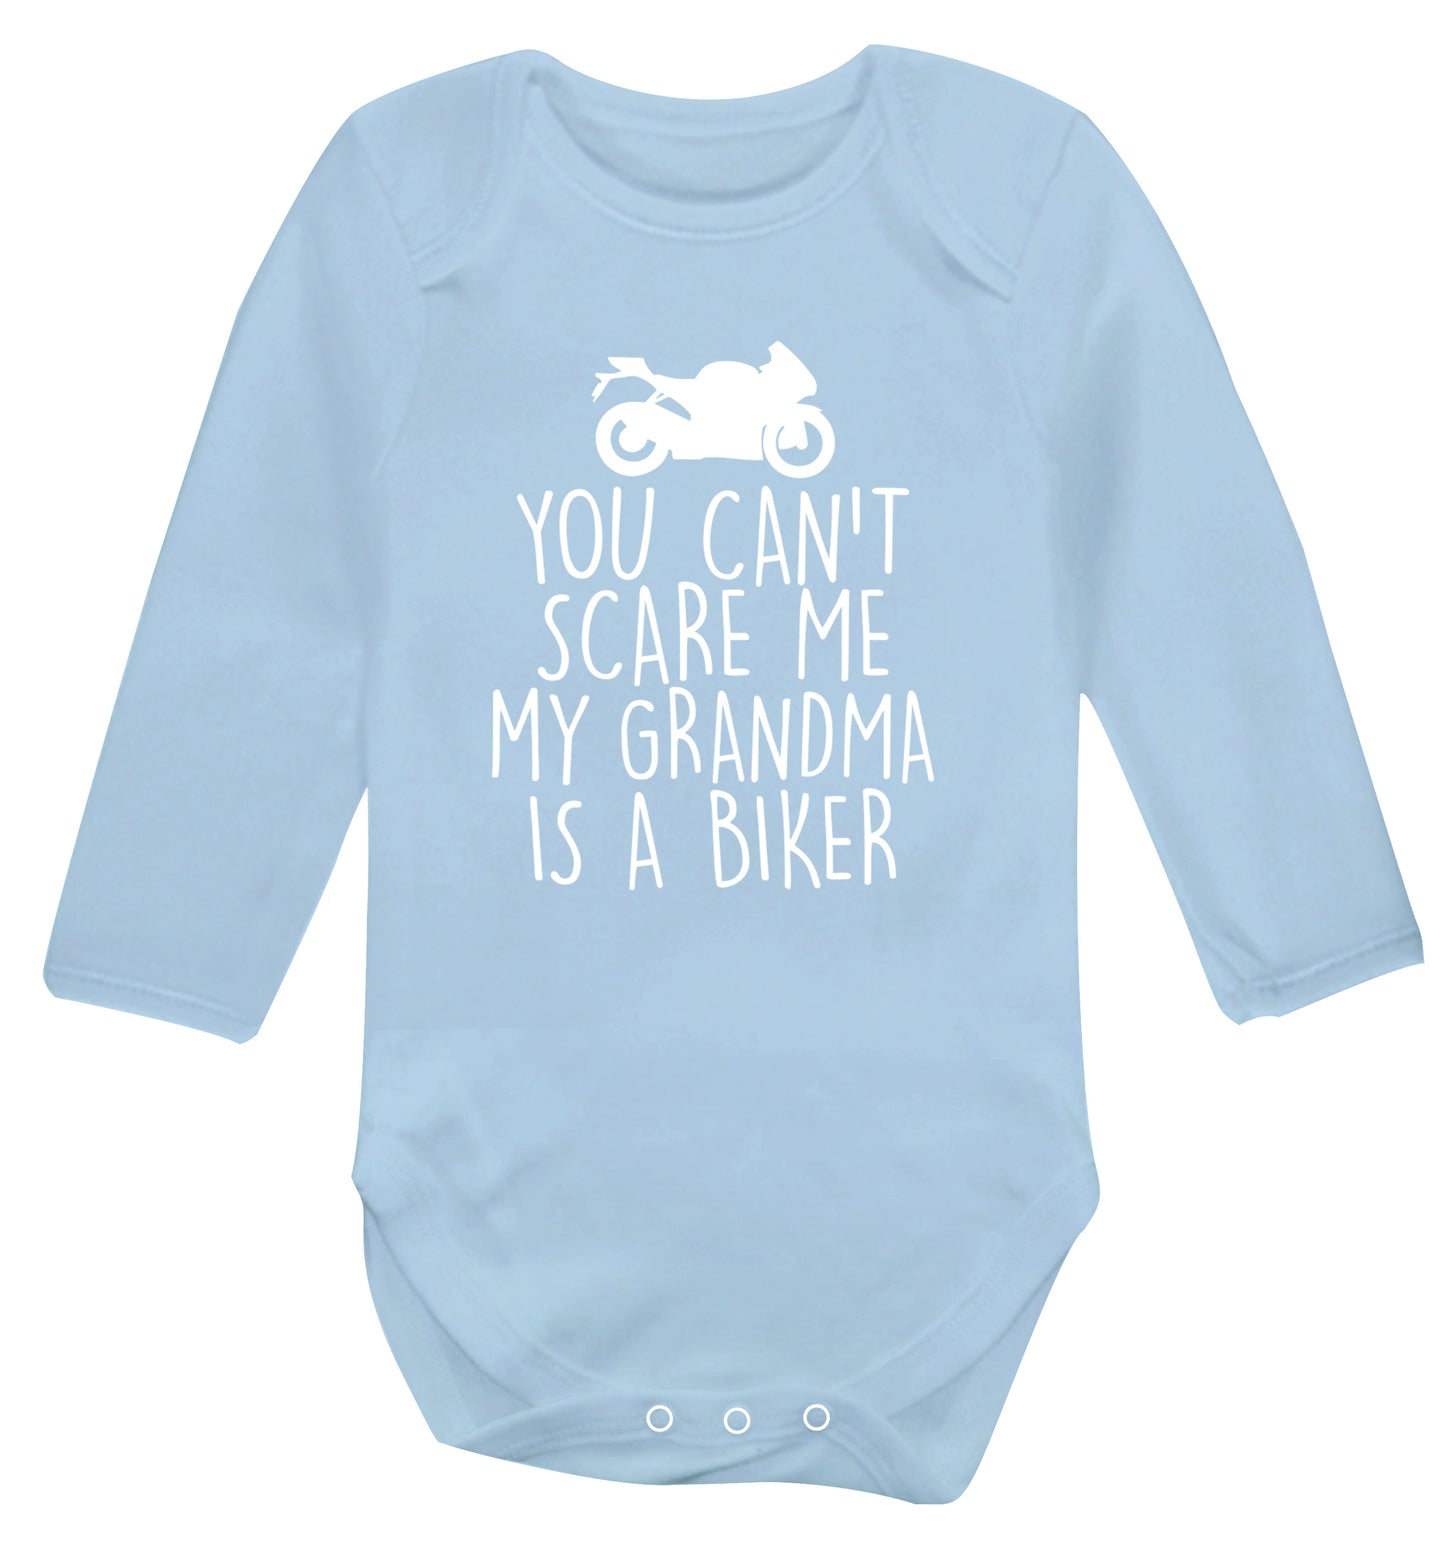 You can't scare me my grandma is a biker Baby Vest long sleeved pale blue 6-12 months